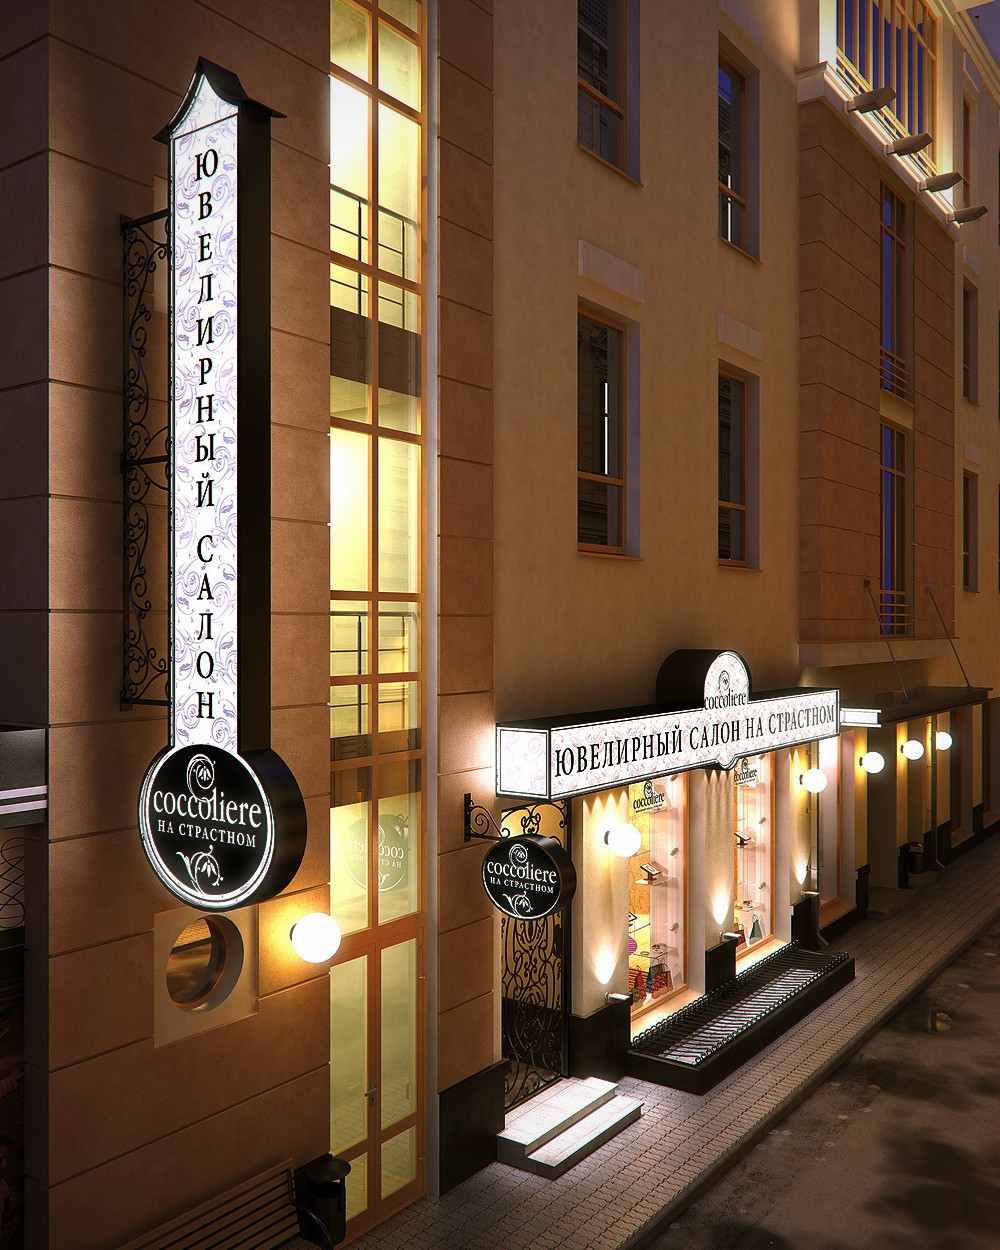 Jewelry salon in Blender cycles render image